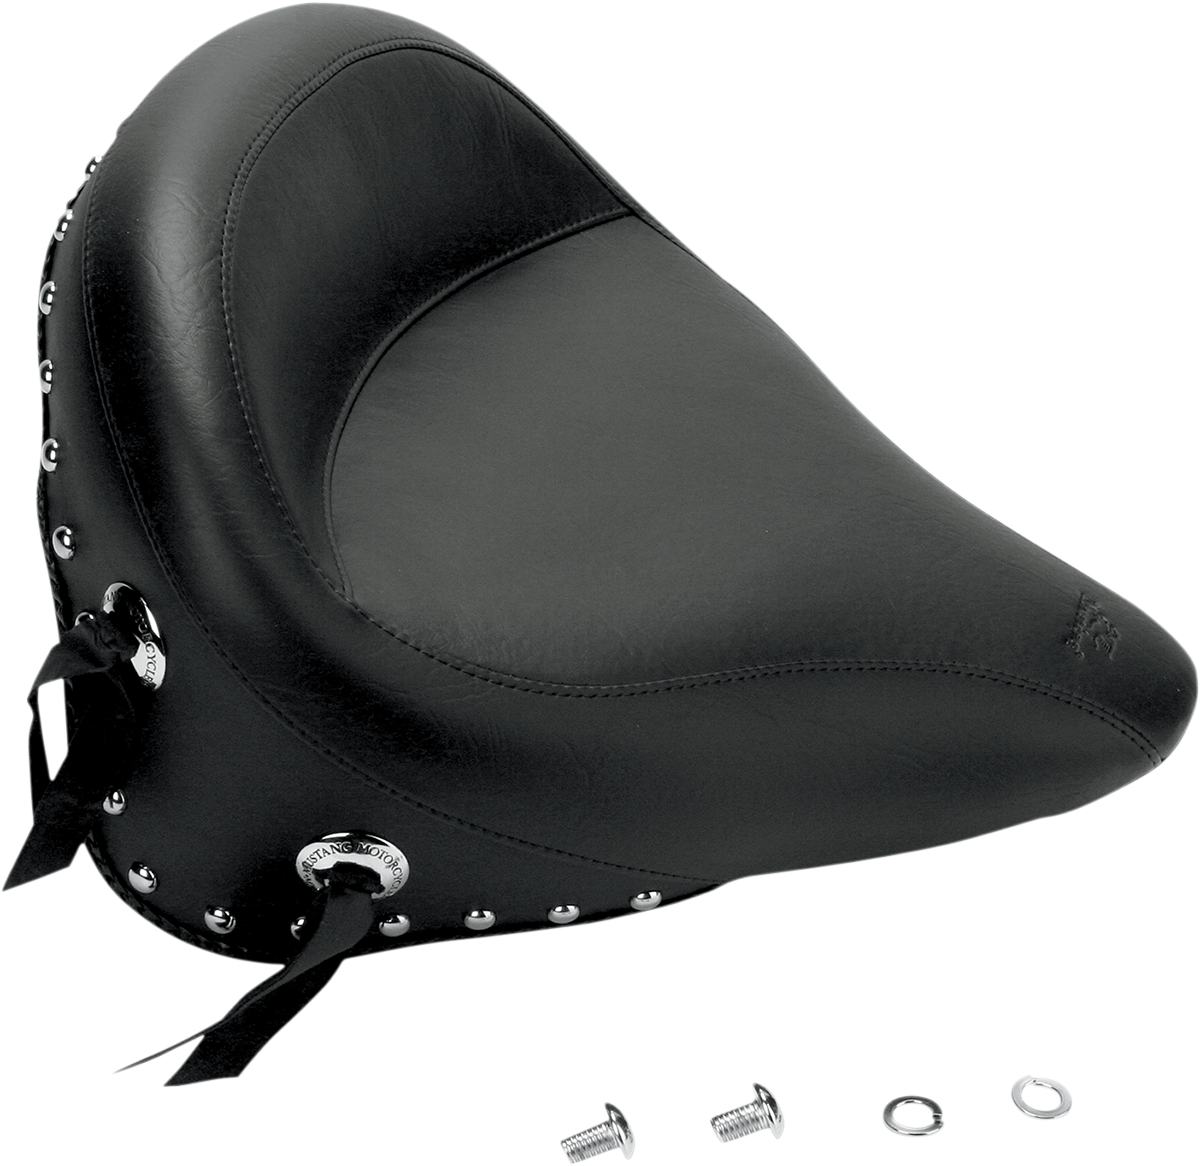 Mustang Wide Studded Solo Seat 2000-2006 Harley Softail Fat Boy FXST 75094